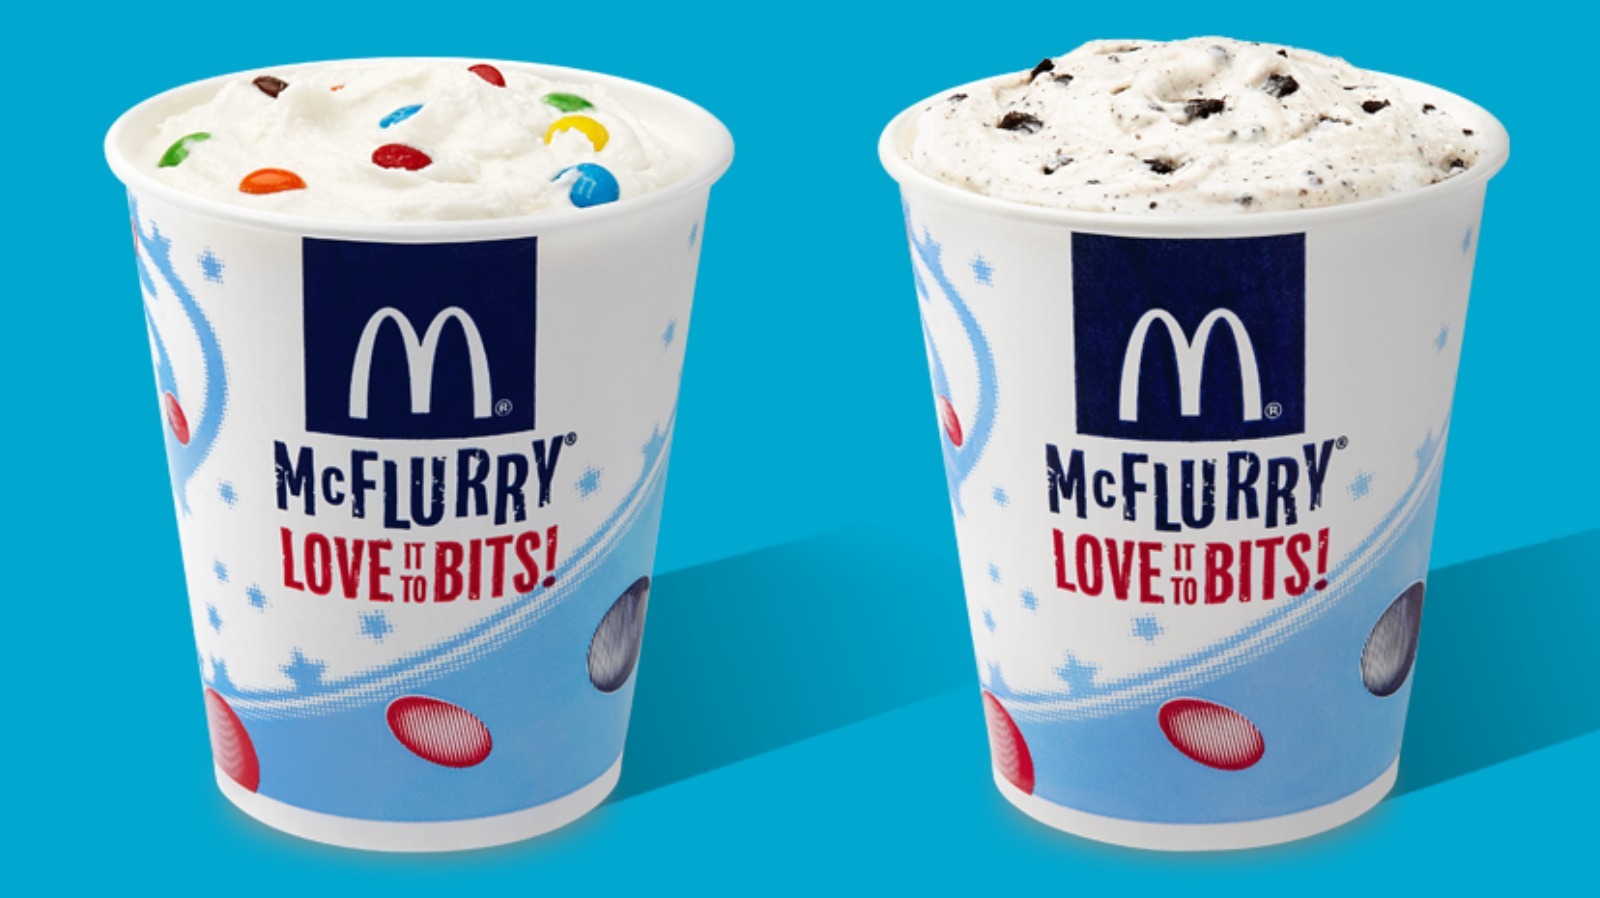 McDonald's Just Revealed A New McFlurry Flavor For Summer